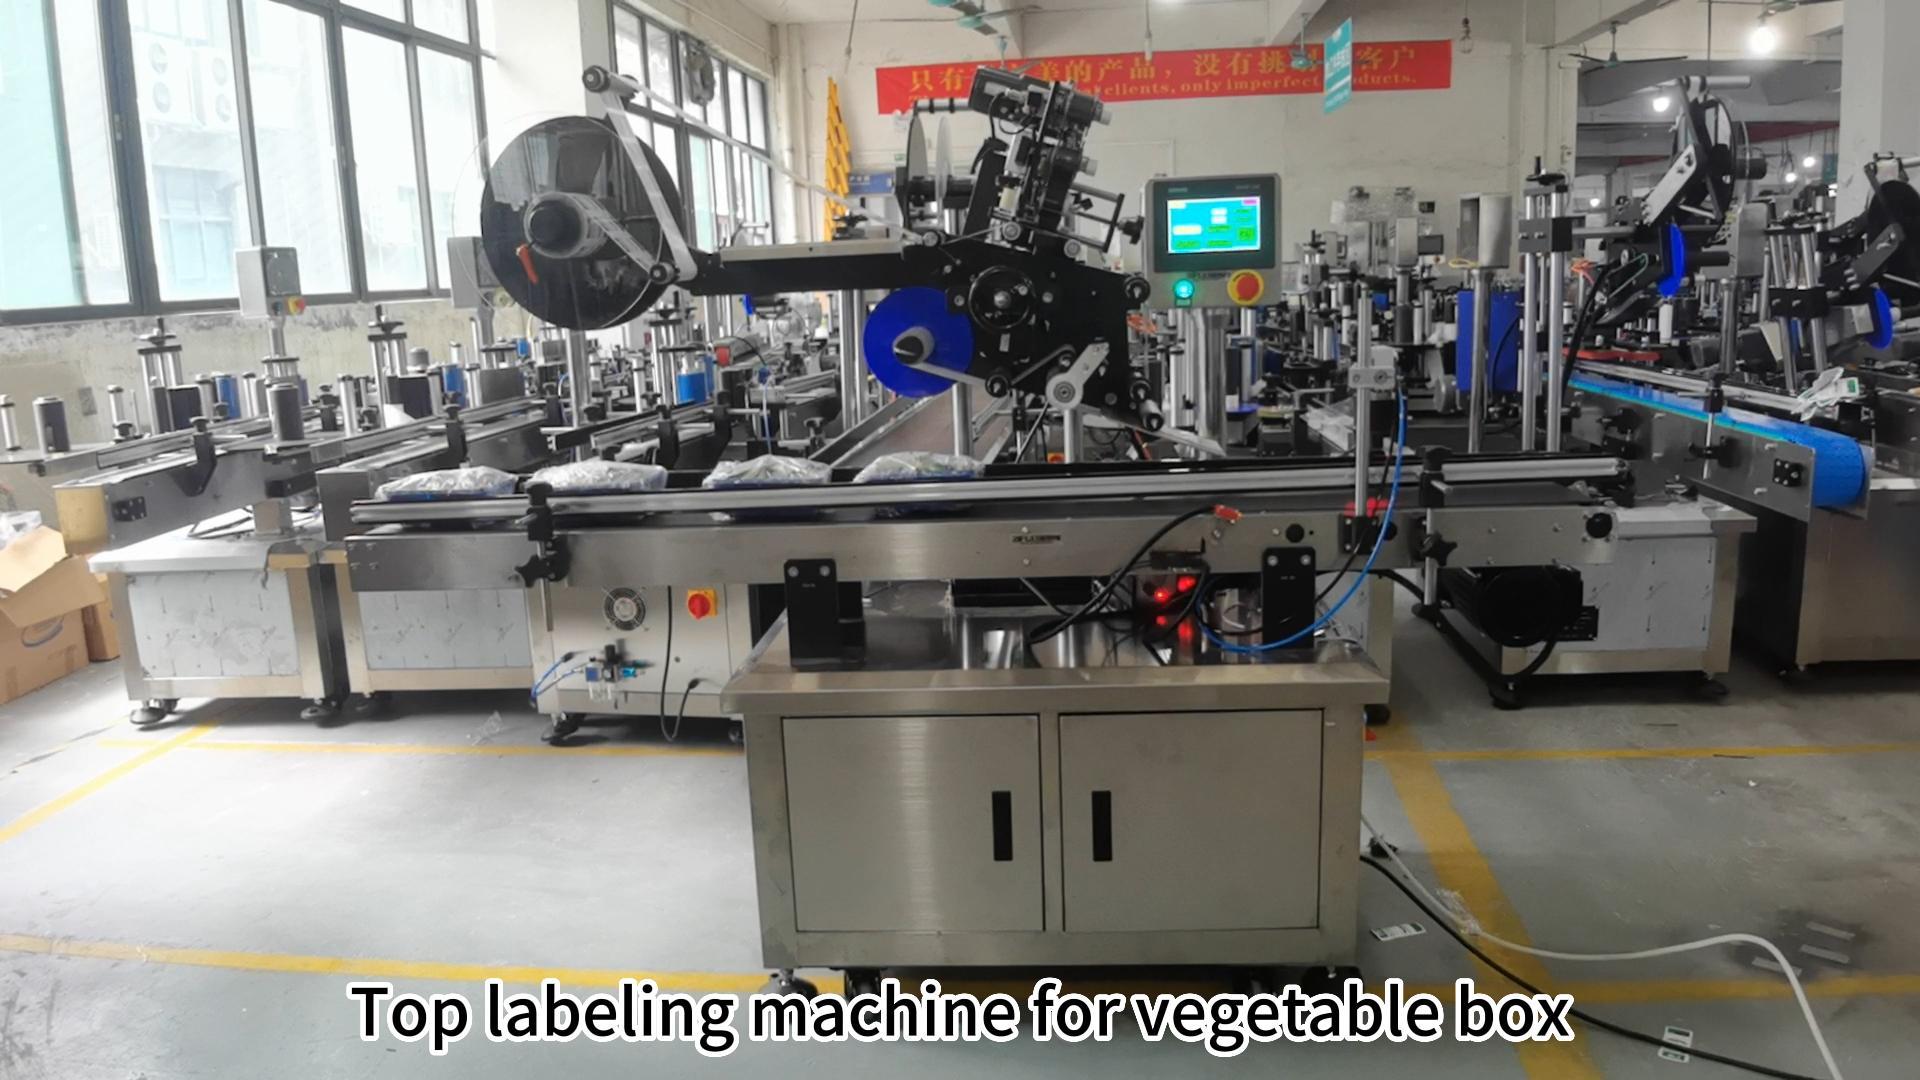 Auto Top Labeling Machine with a Code Printer Ordered by Colombia Customer